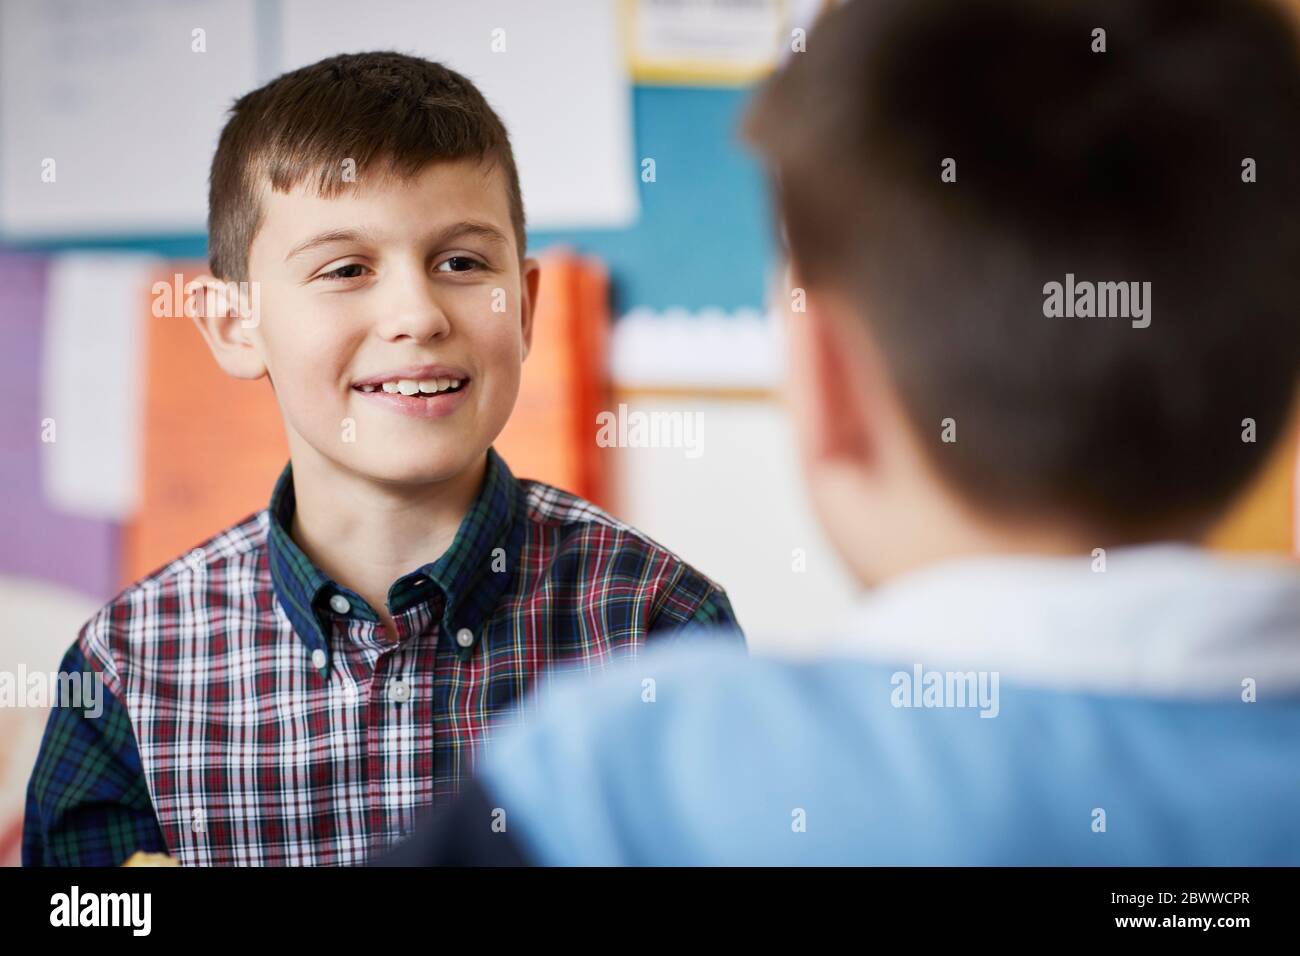 Portrait of smiling boy looking at classmate in classroom Stock Photo